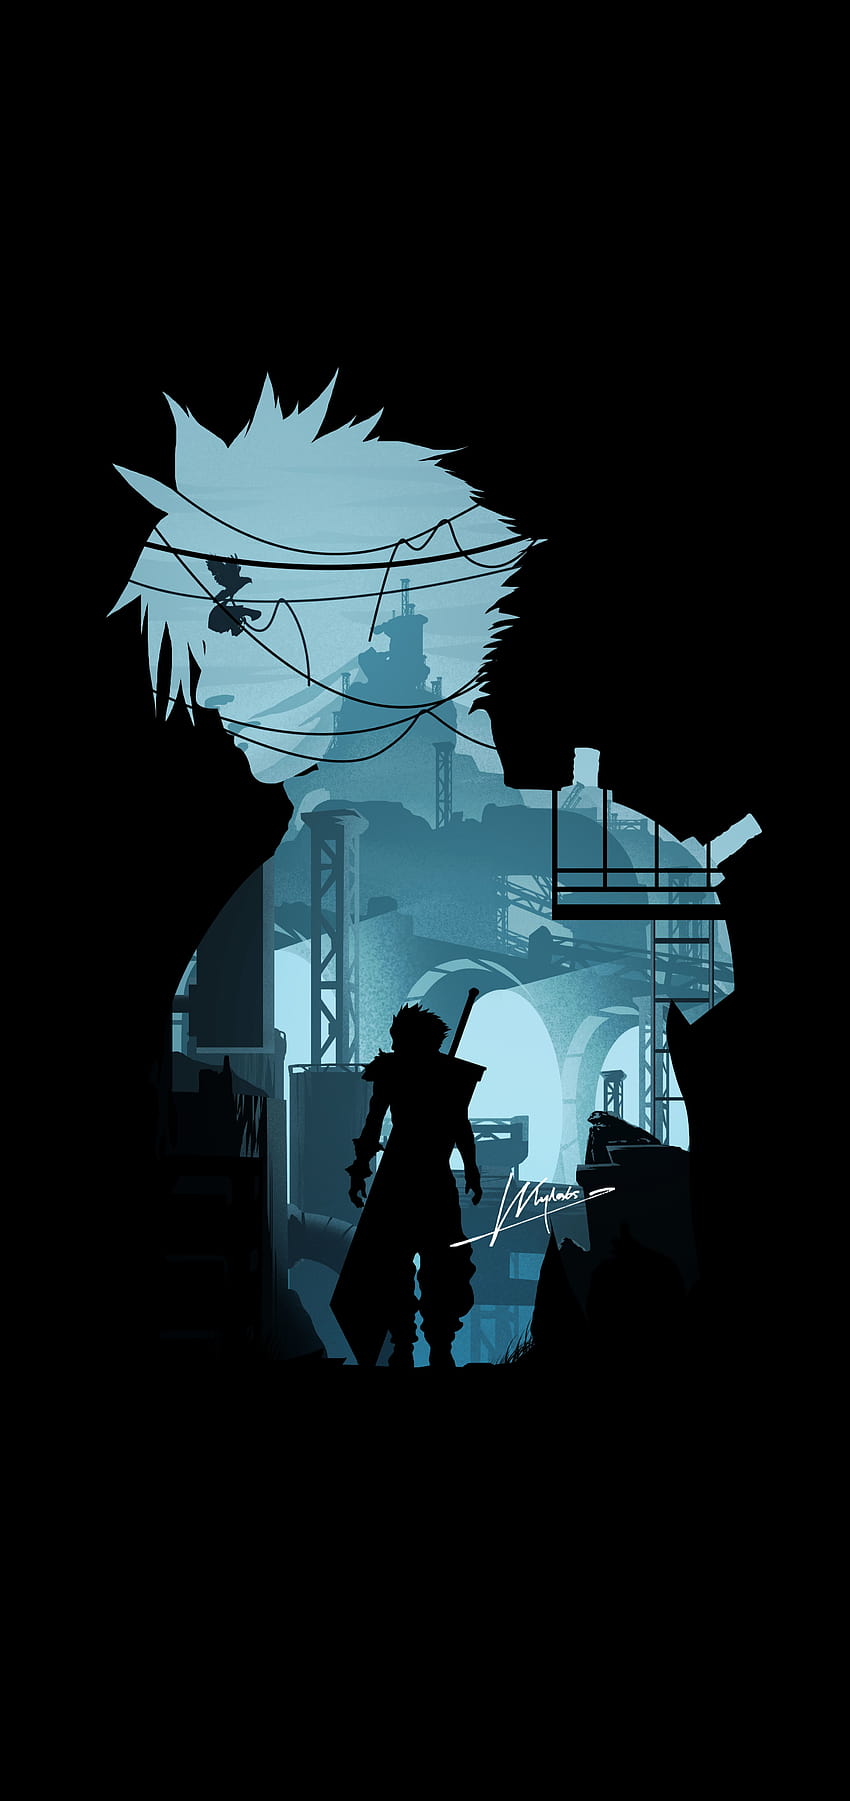 Final Fantasy VII Cloud Silhouette OLED [2900x6143] : s Amoled, Final Fantasy Amoled fondo de pantalla del teléfono